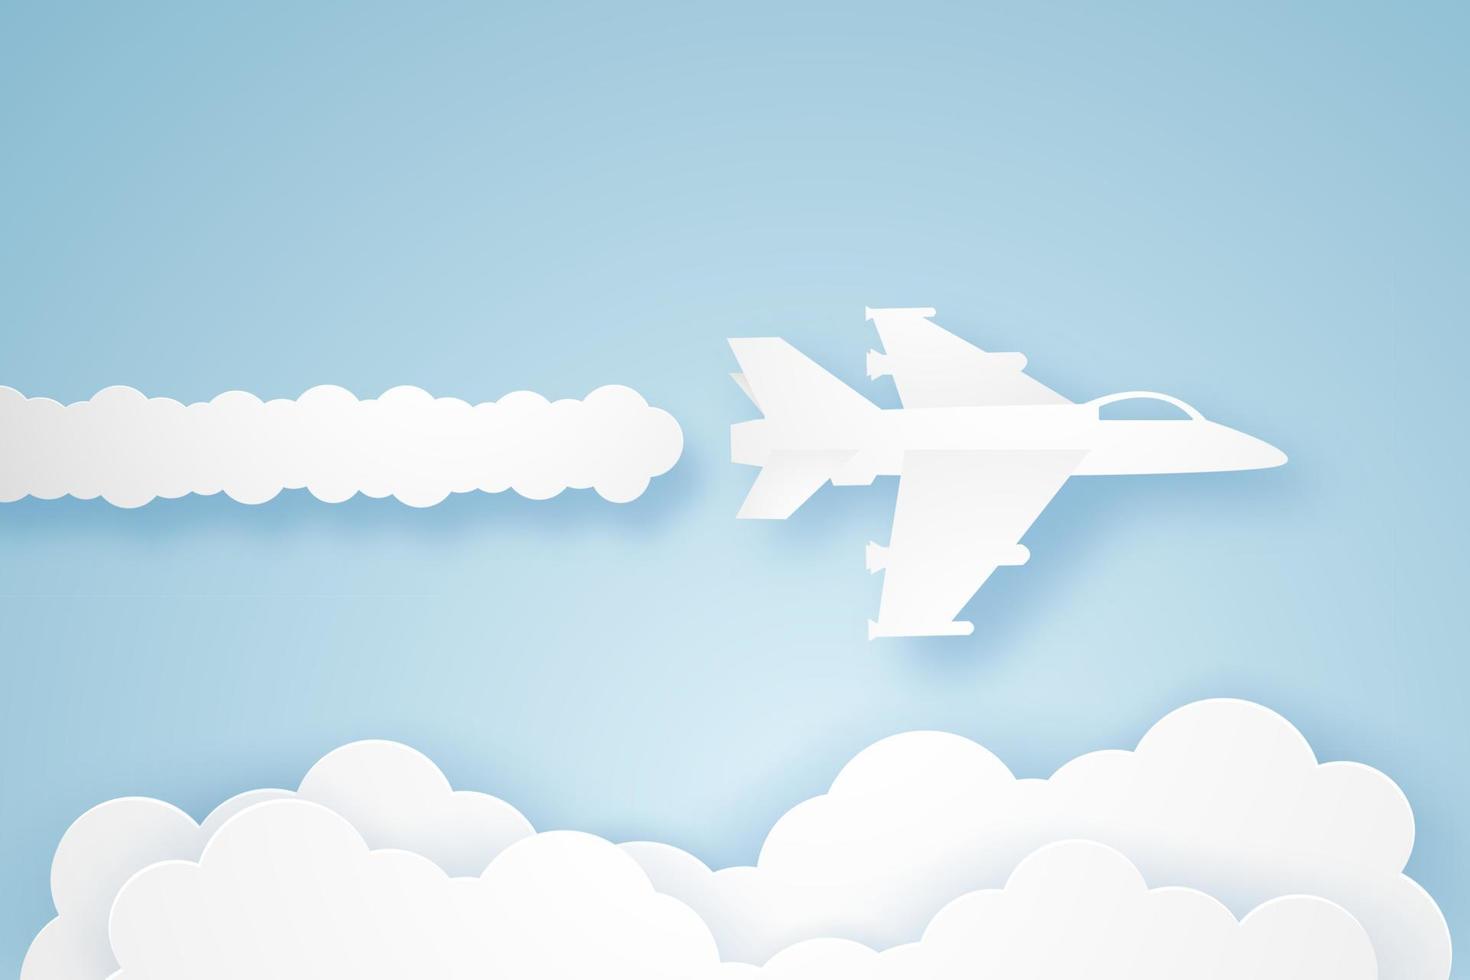 Fighter aircraft flying in the sky, paper art style vector